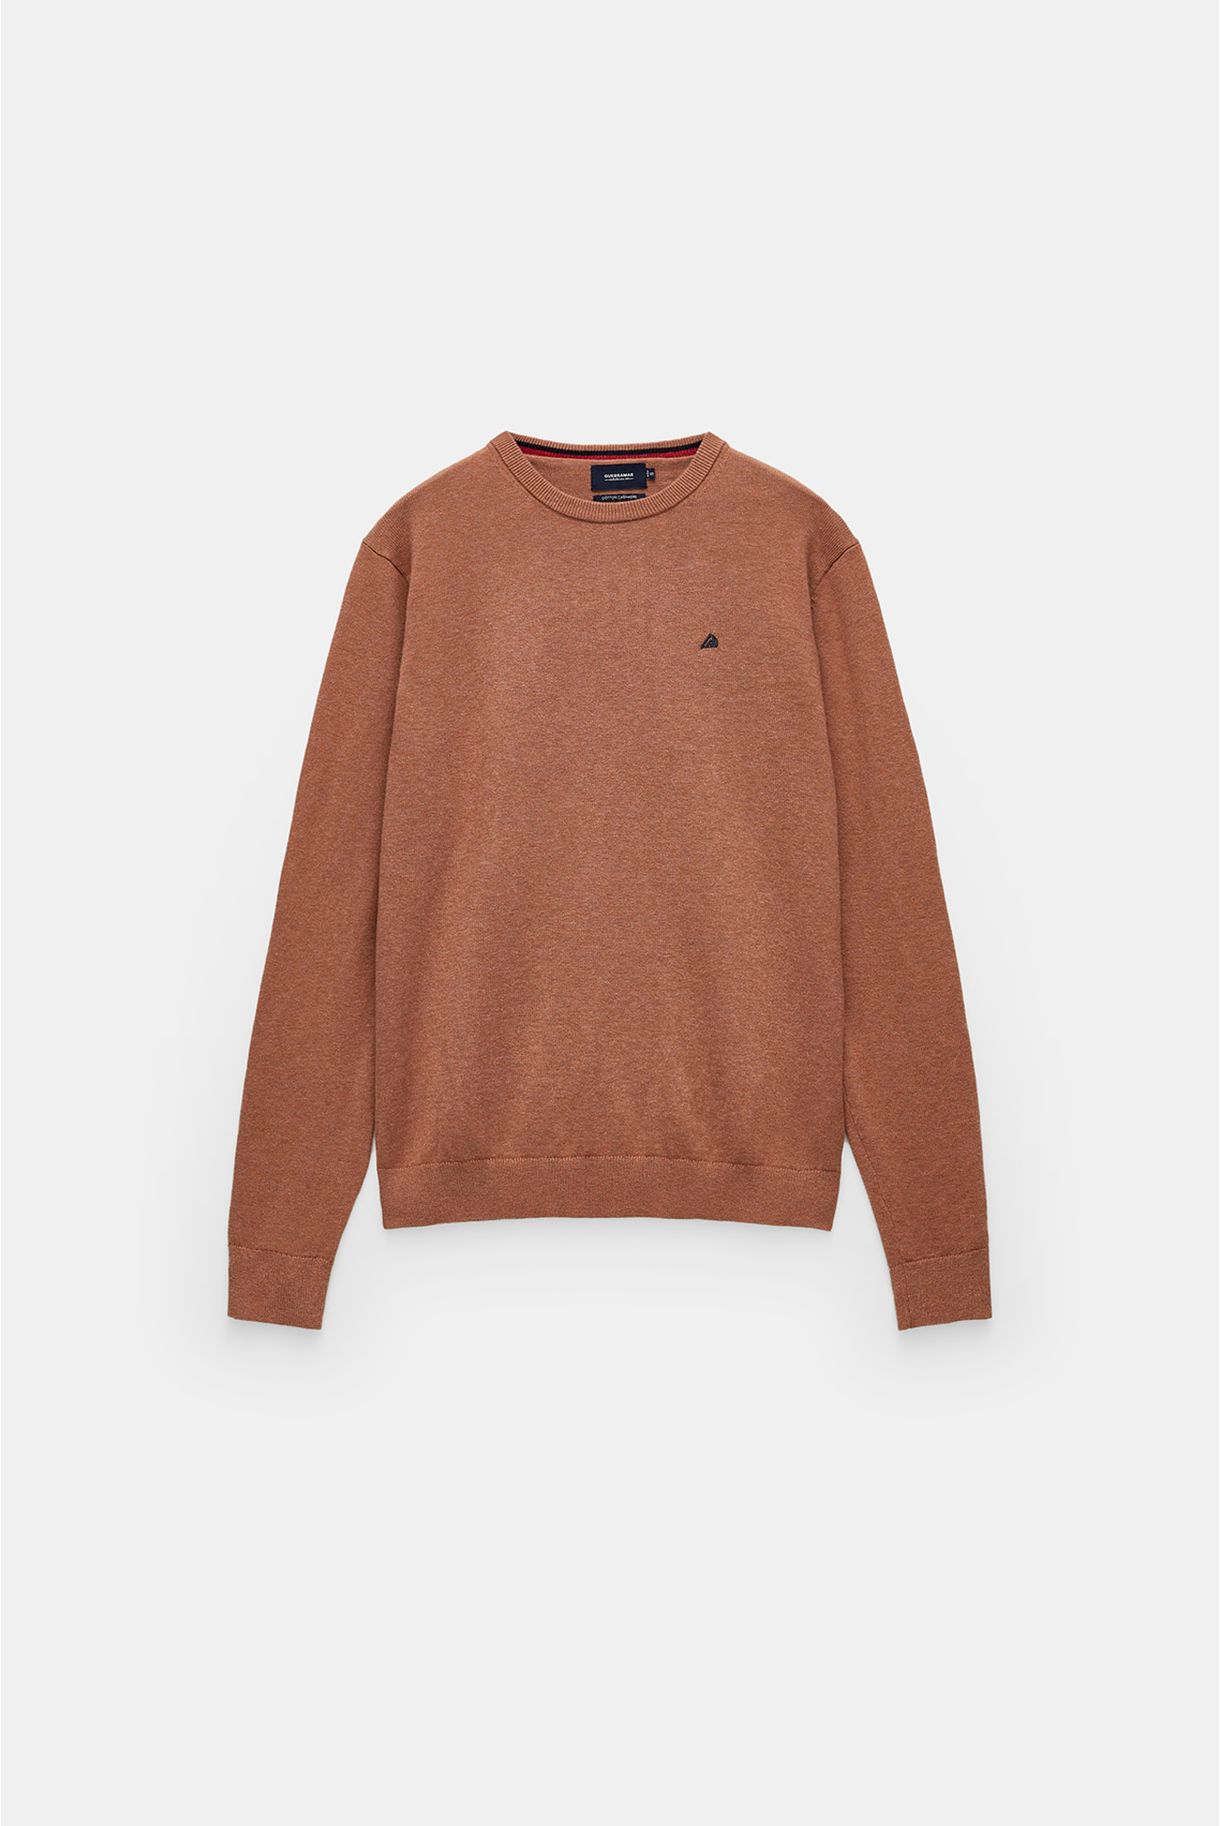 Round neck sweater in cotton and cashmere